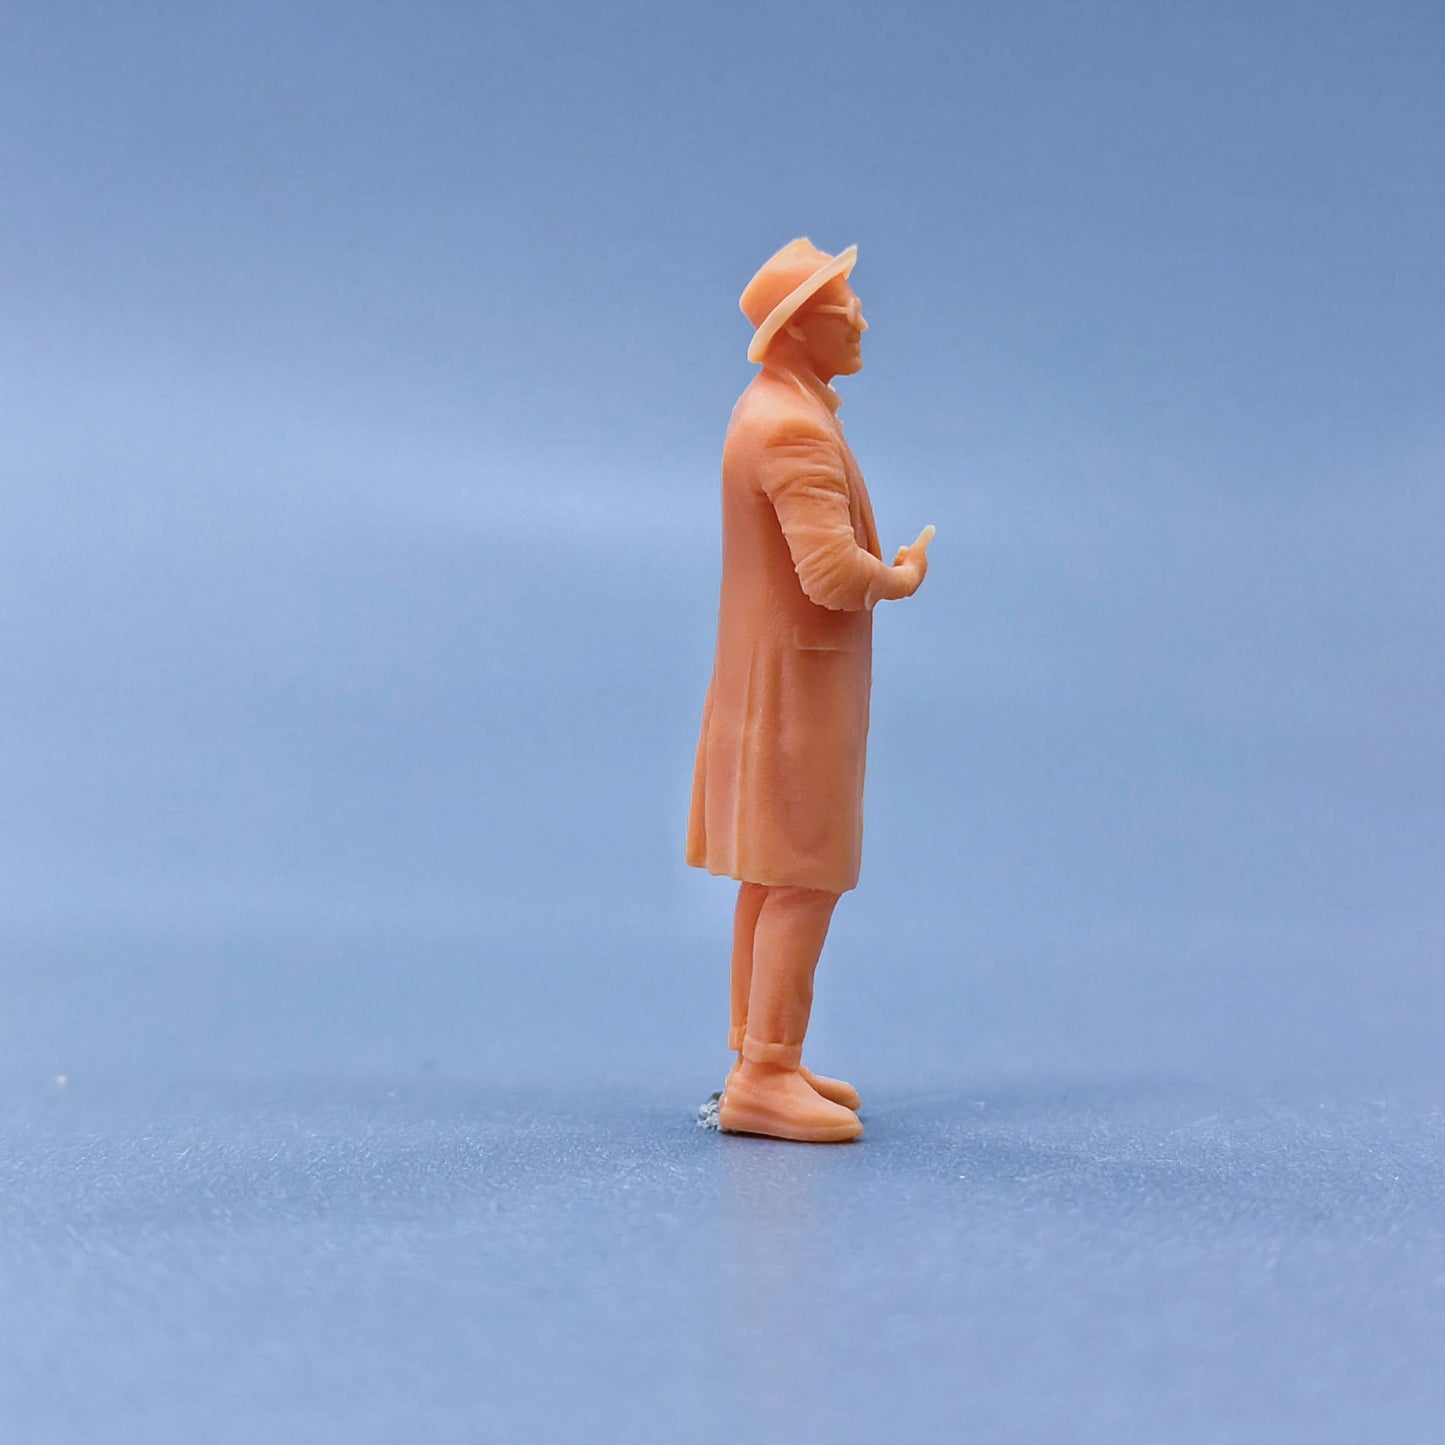 1/64 1/43 Figurines Scale Model Resin Uncle Wearing A Hat and Coat Uncolored Miniatures Diorama Hand-painted  L220